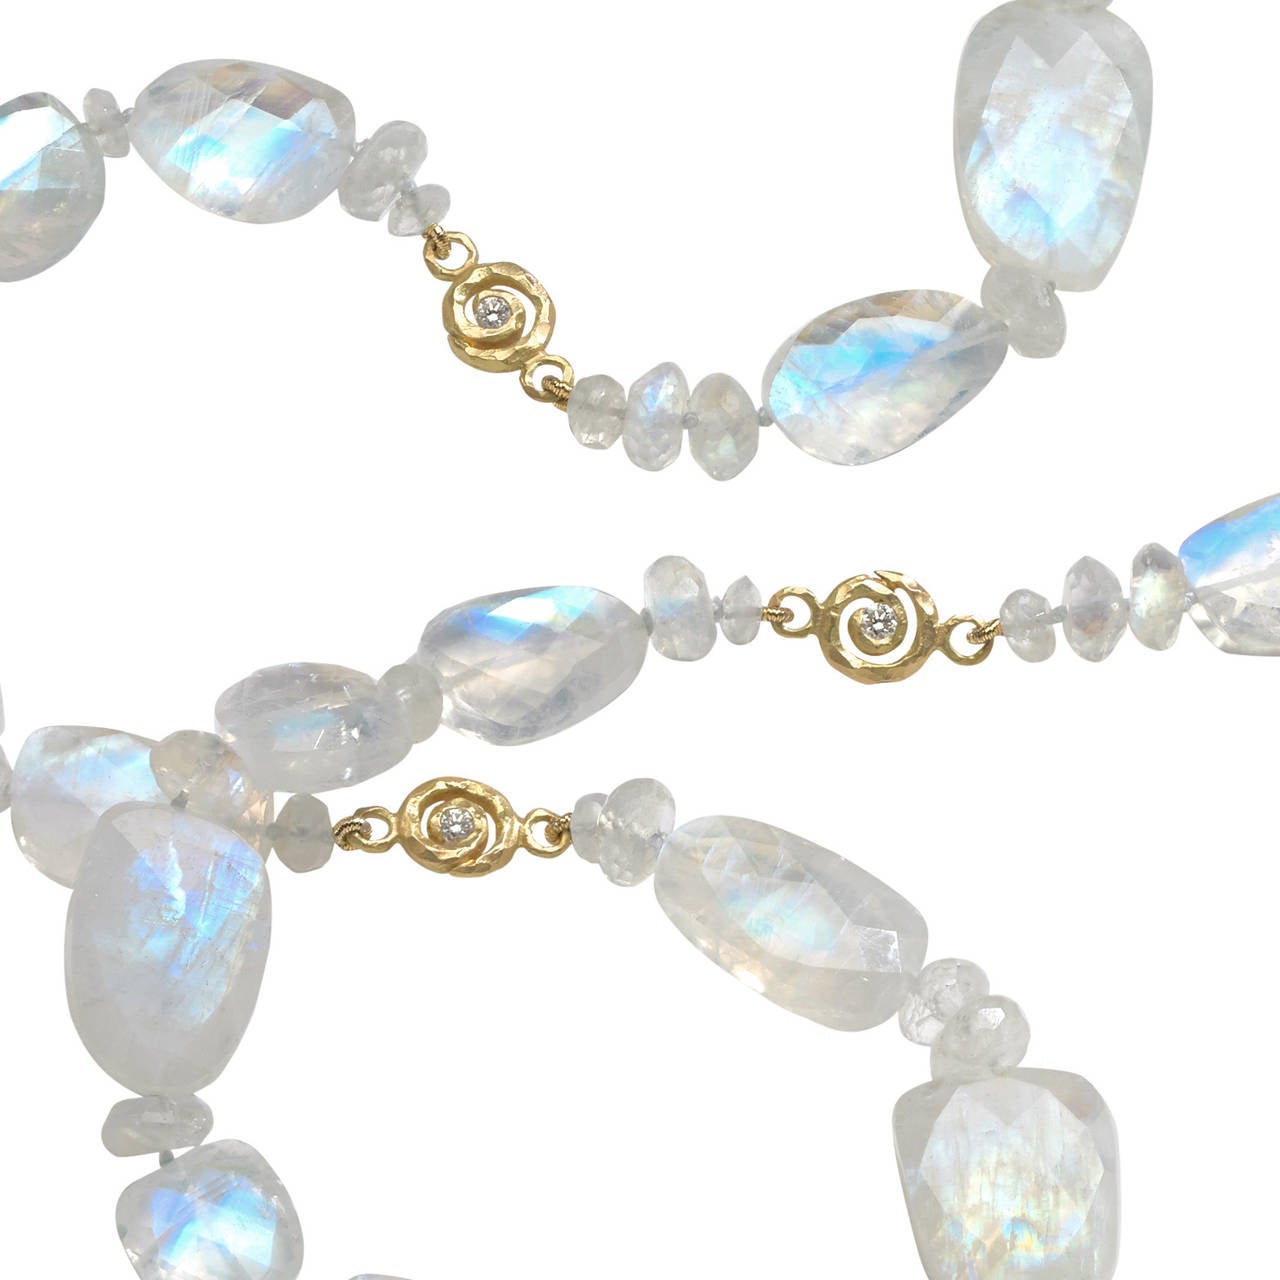 One-of-a-Kind Lustrous Moonstone Necklace handcrafted with rainbow moonstone beads exhibiting primarily blue and white sheen. Moonstones are accented with six 18k yellow gold, diamond-embedded stations (0.60tcw) and an 18k yellow gold scroll